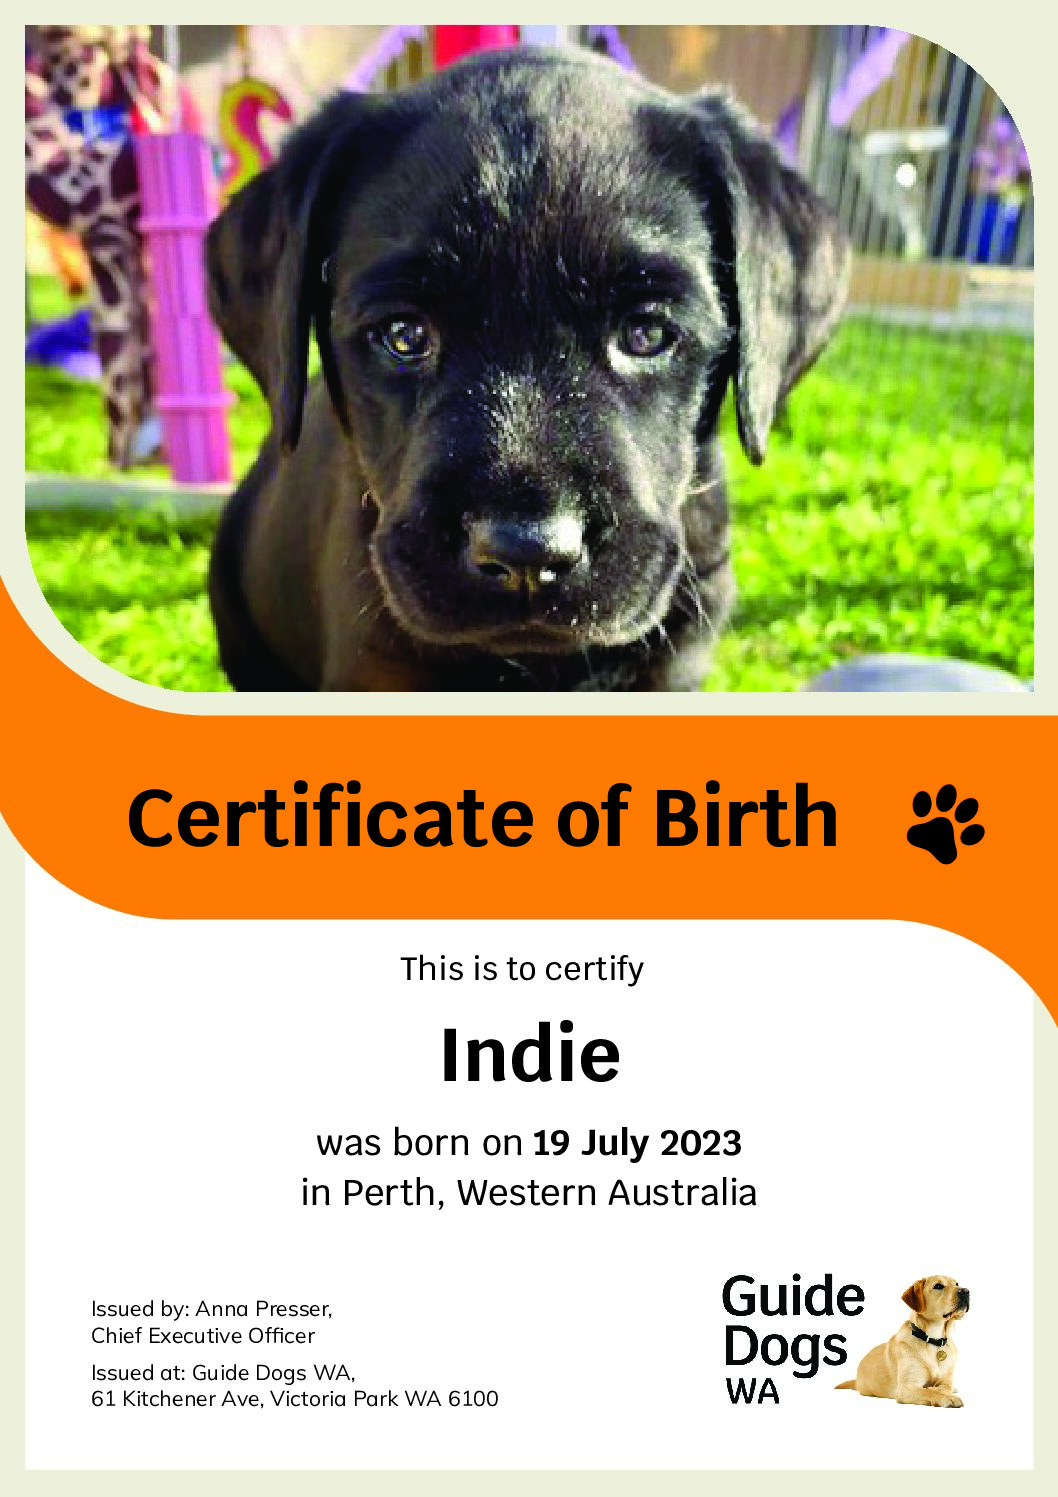 Introducing Indie – Guide Dogs WA